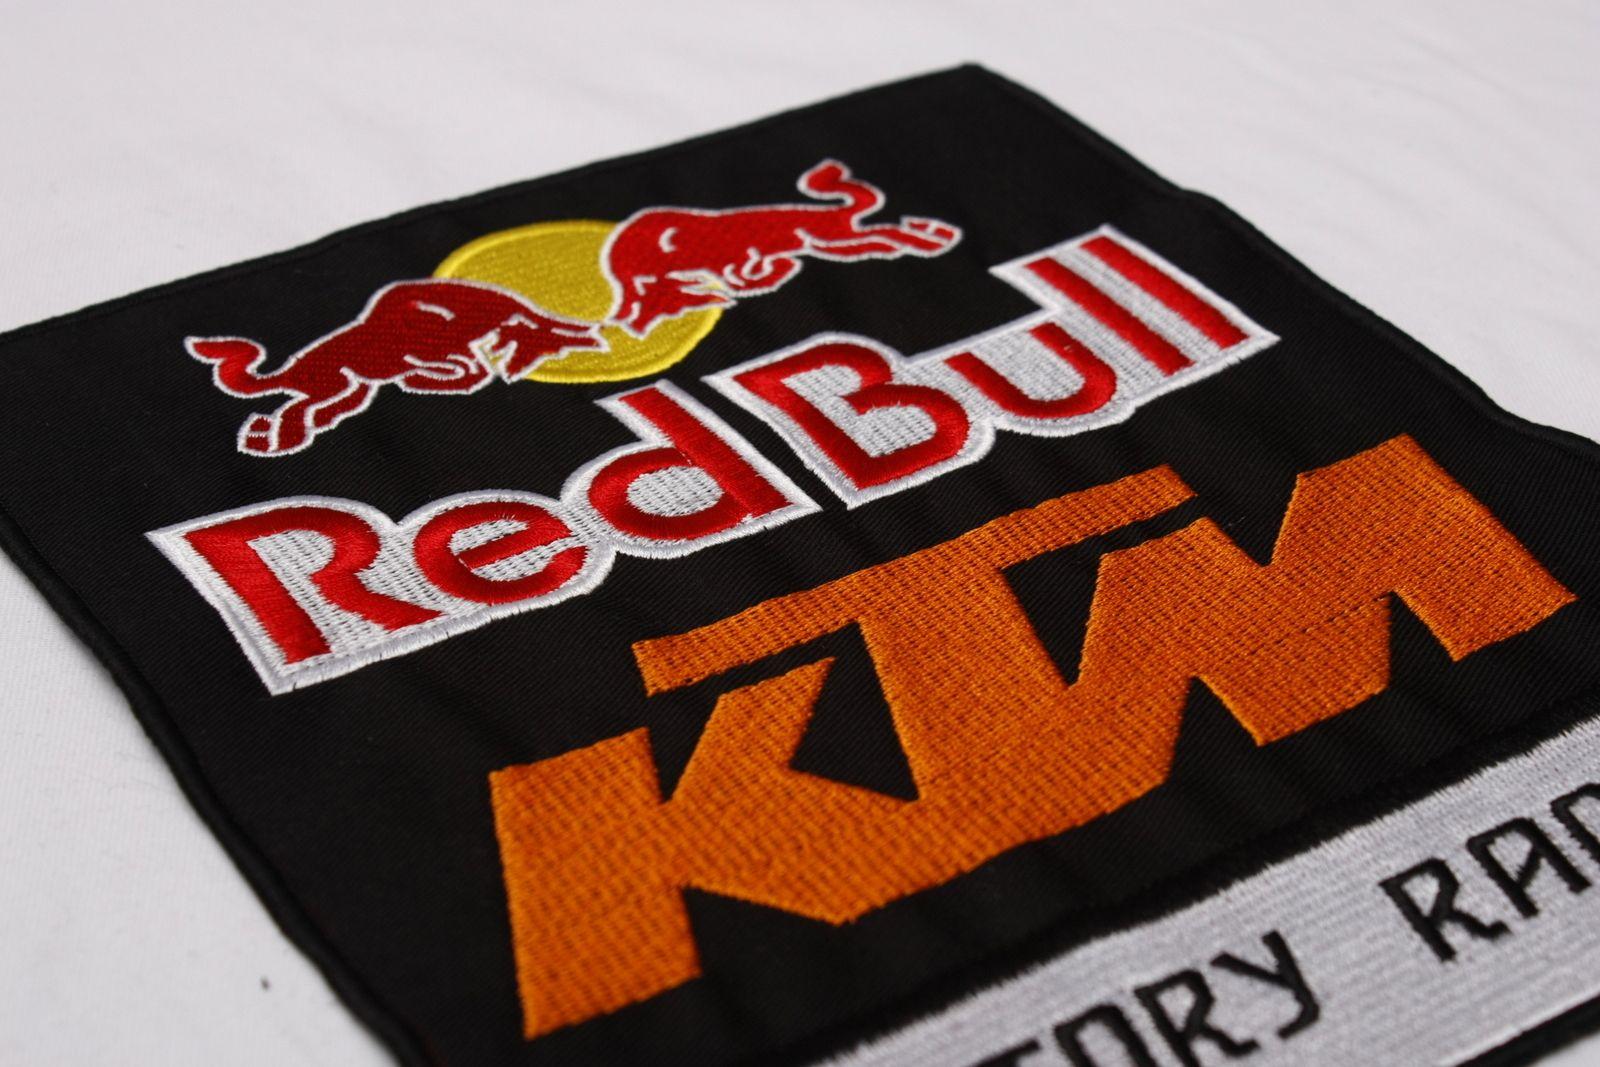 Factory KTM Logo - KTM & Red Bull patches